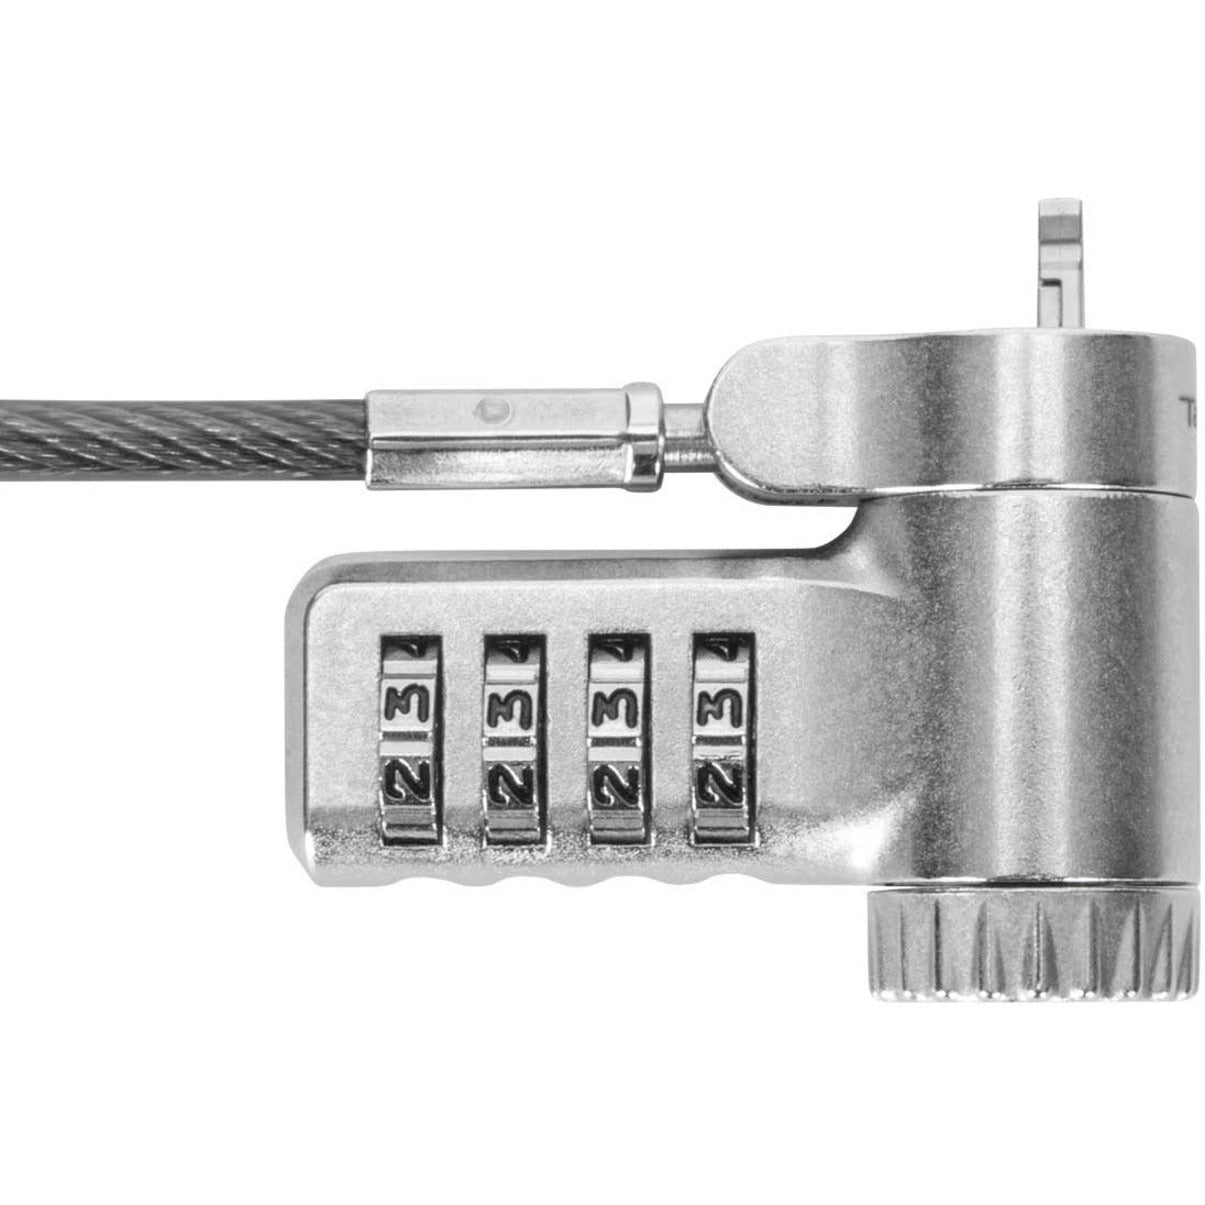 Targus ASP96RGLX DEFCON Ultimate Universal Resettable Combination Lock, 6.50 ft Cable Length, 4-digit Locking Combination